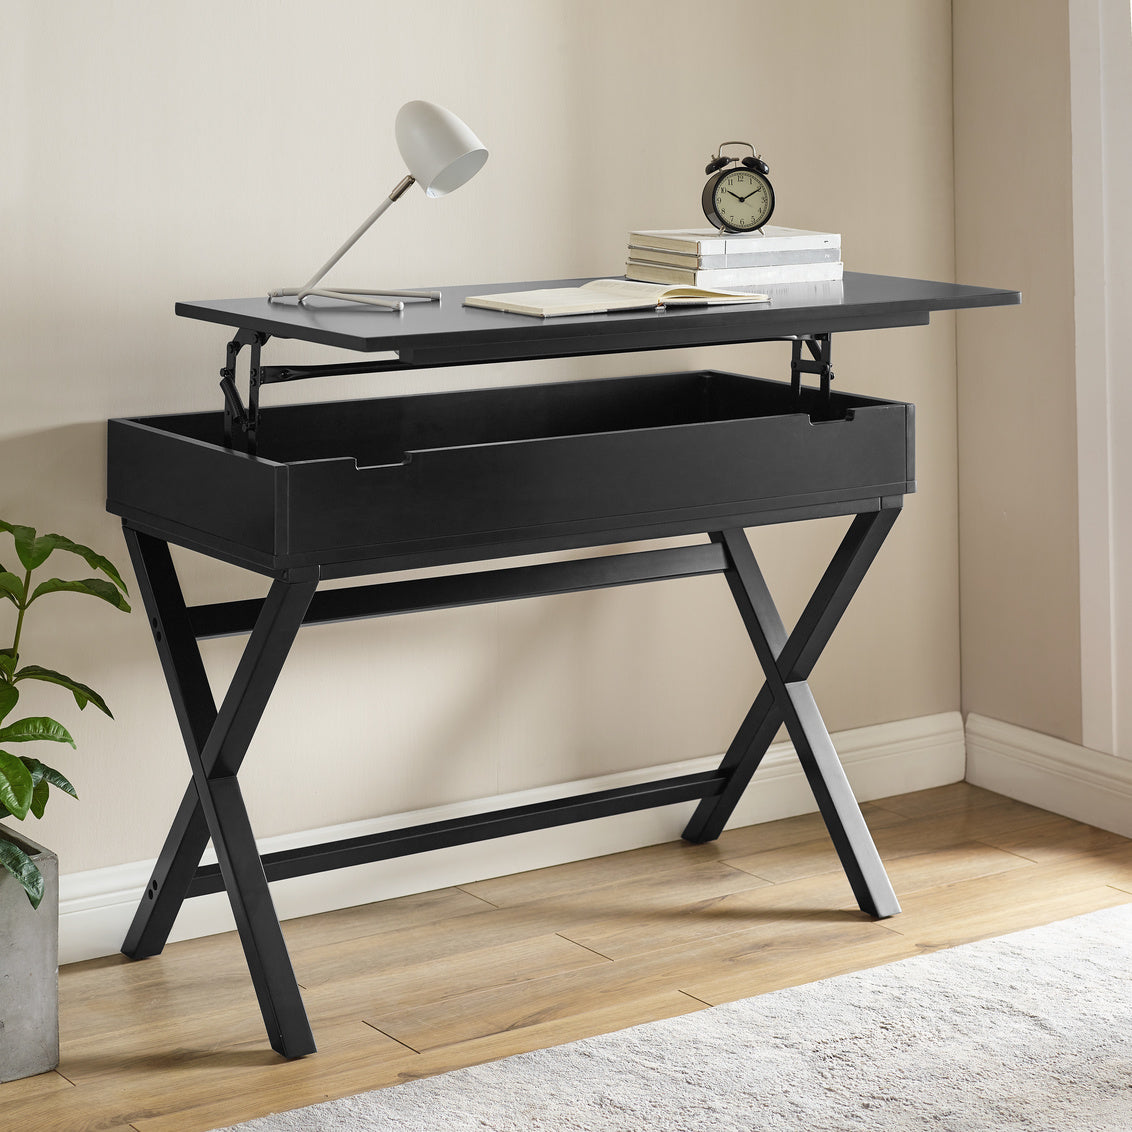 Awesome Black Lift Top Desk